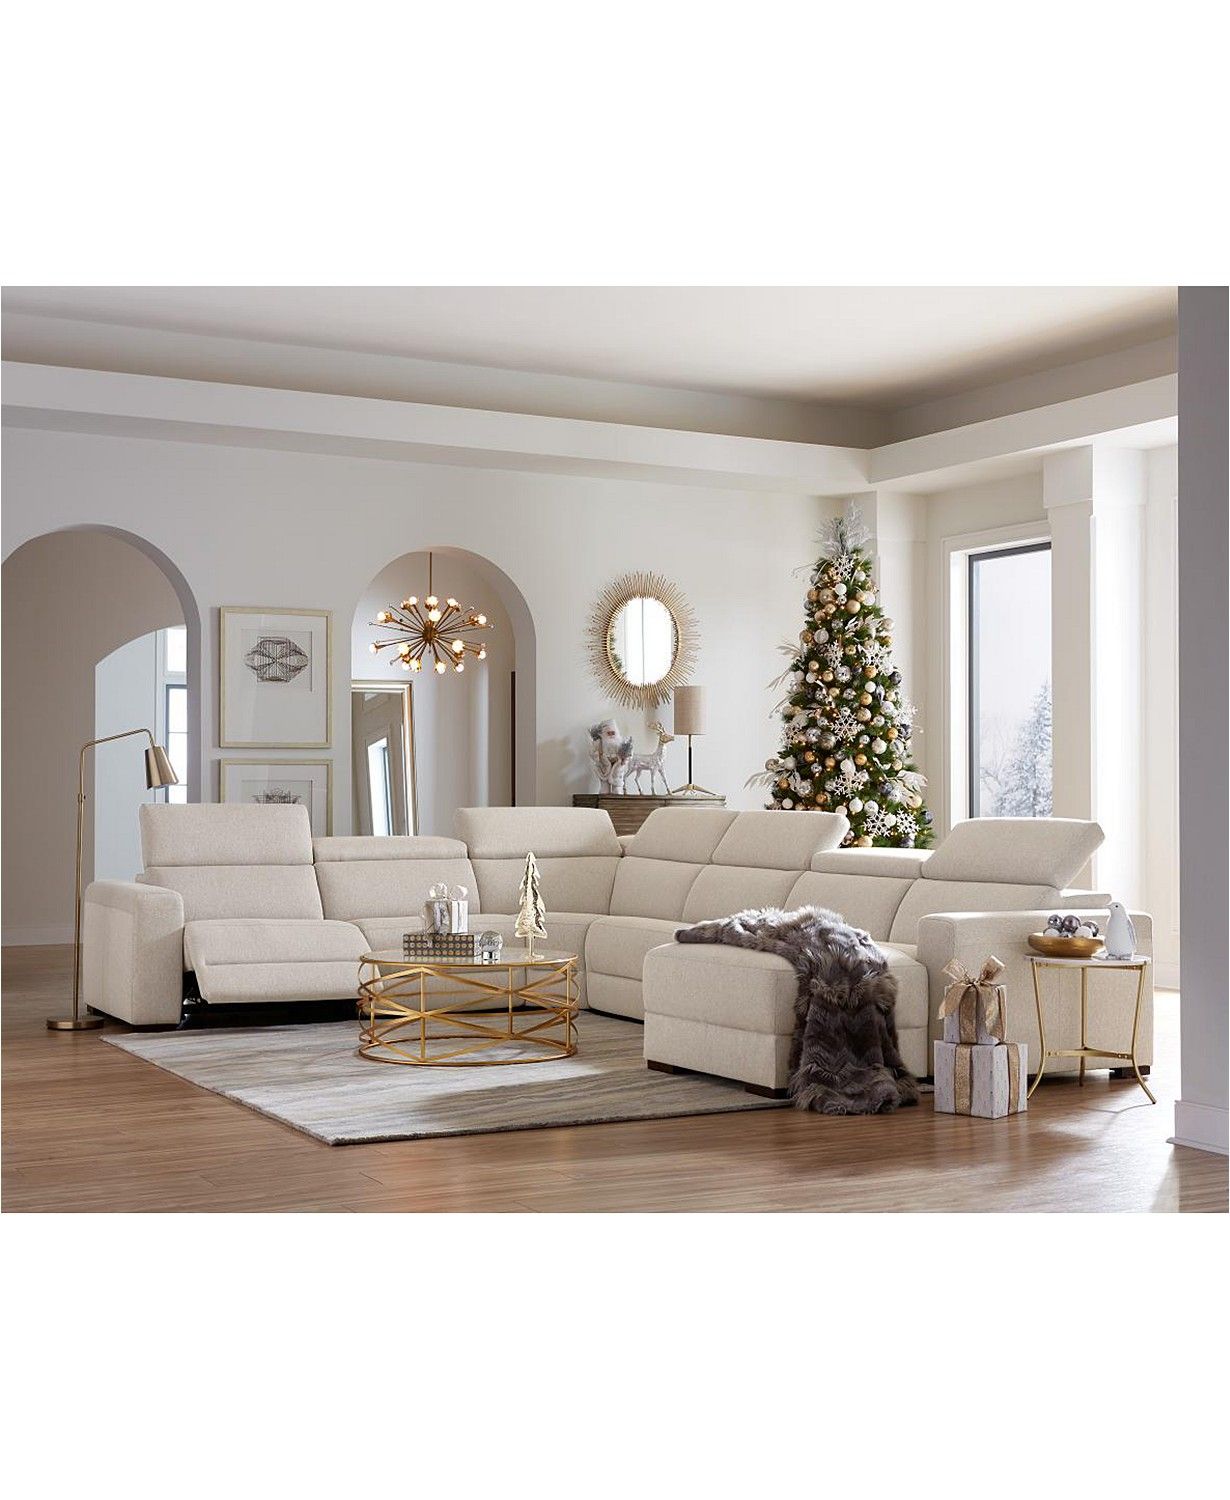 Seating furniture – sectional reclining
sofa